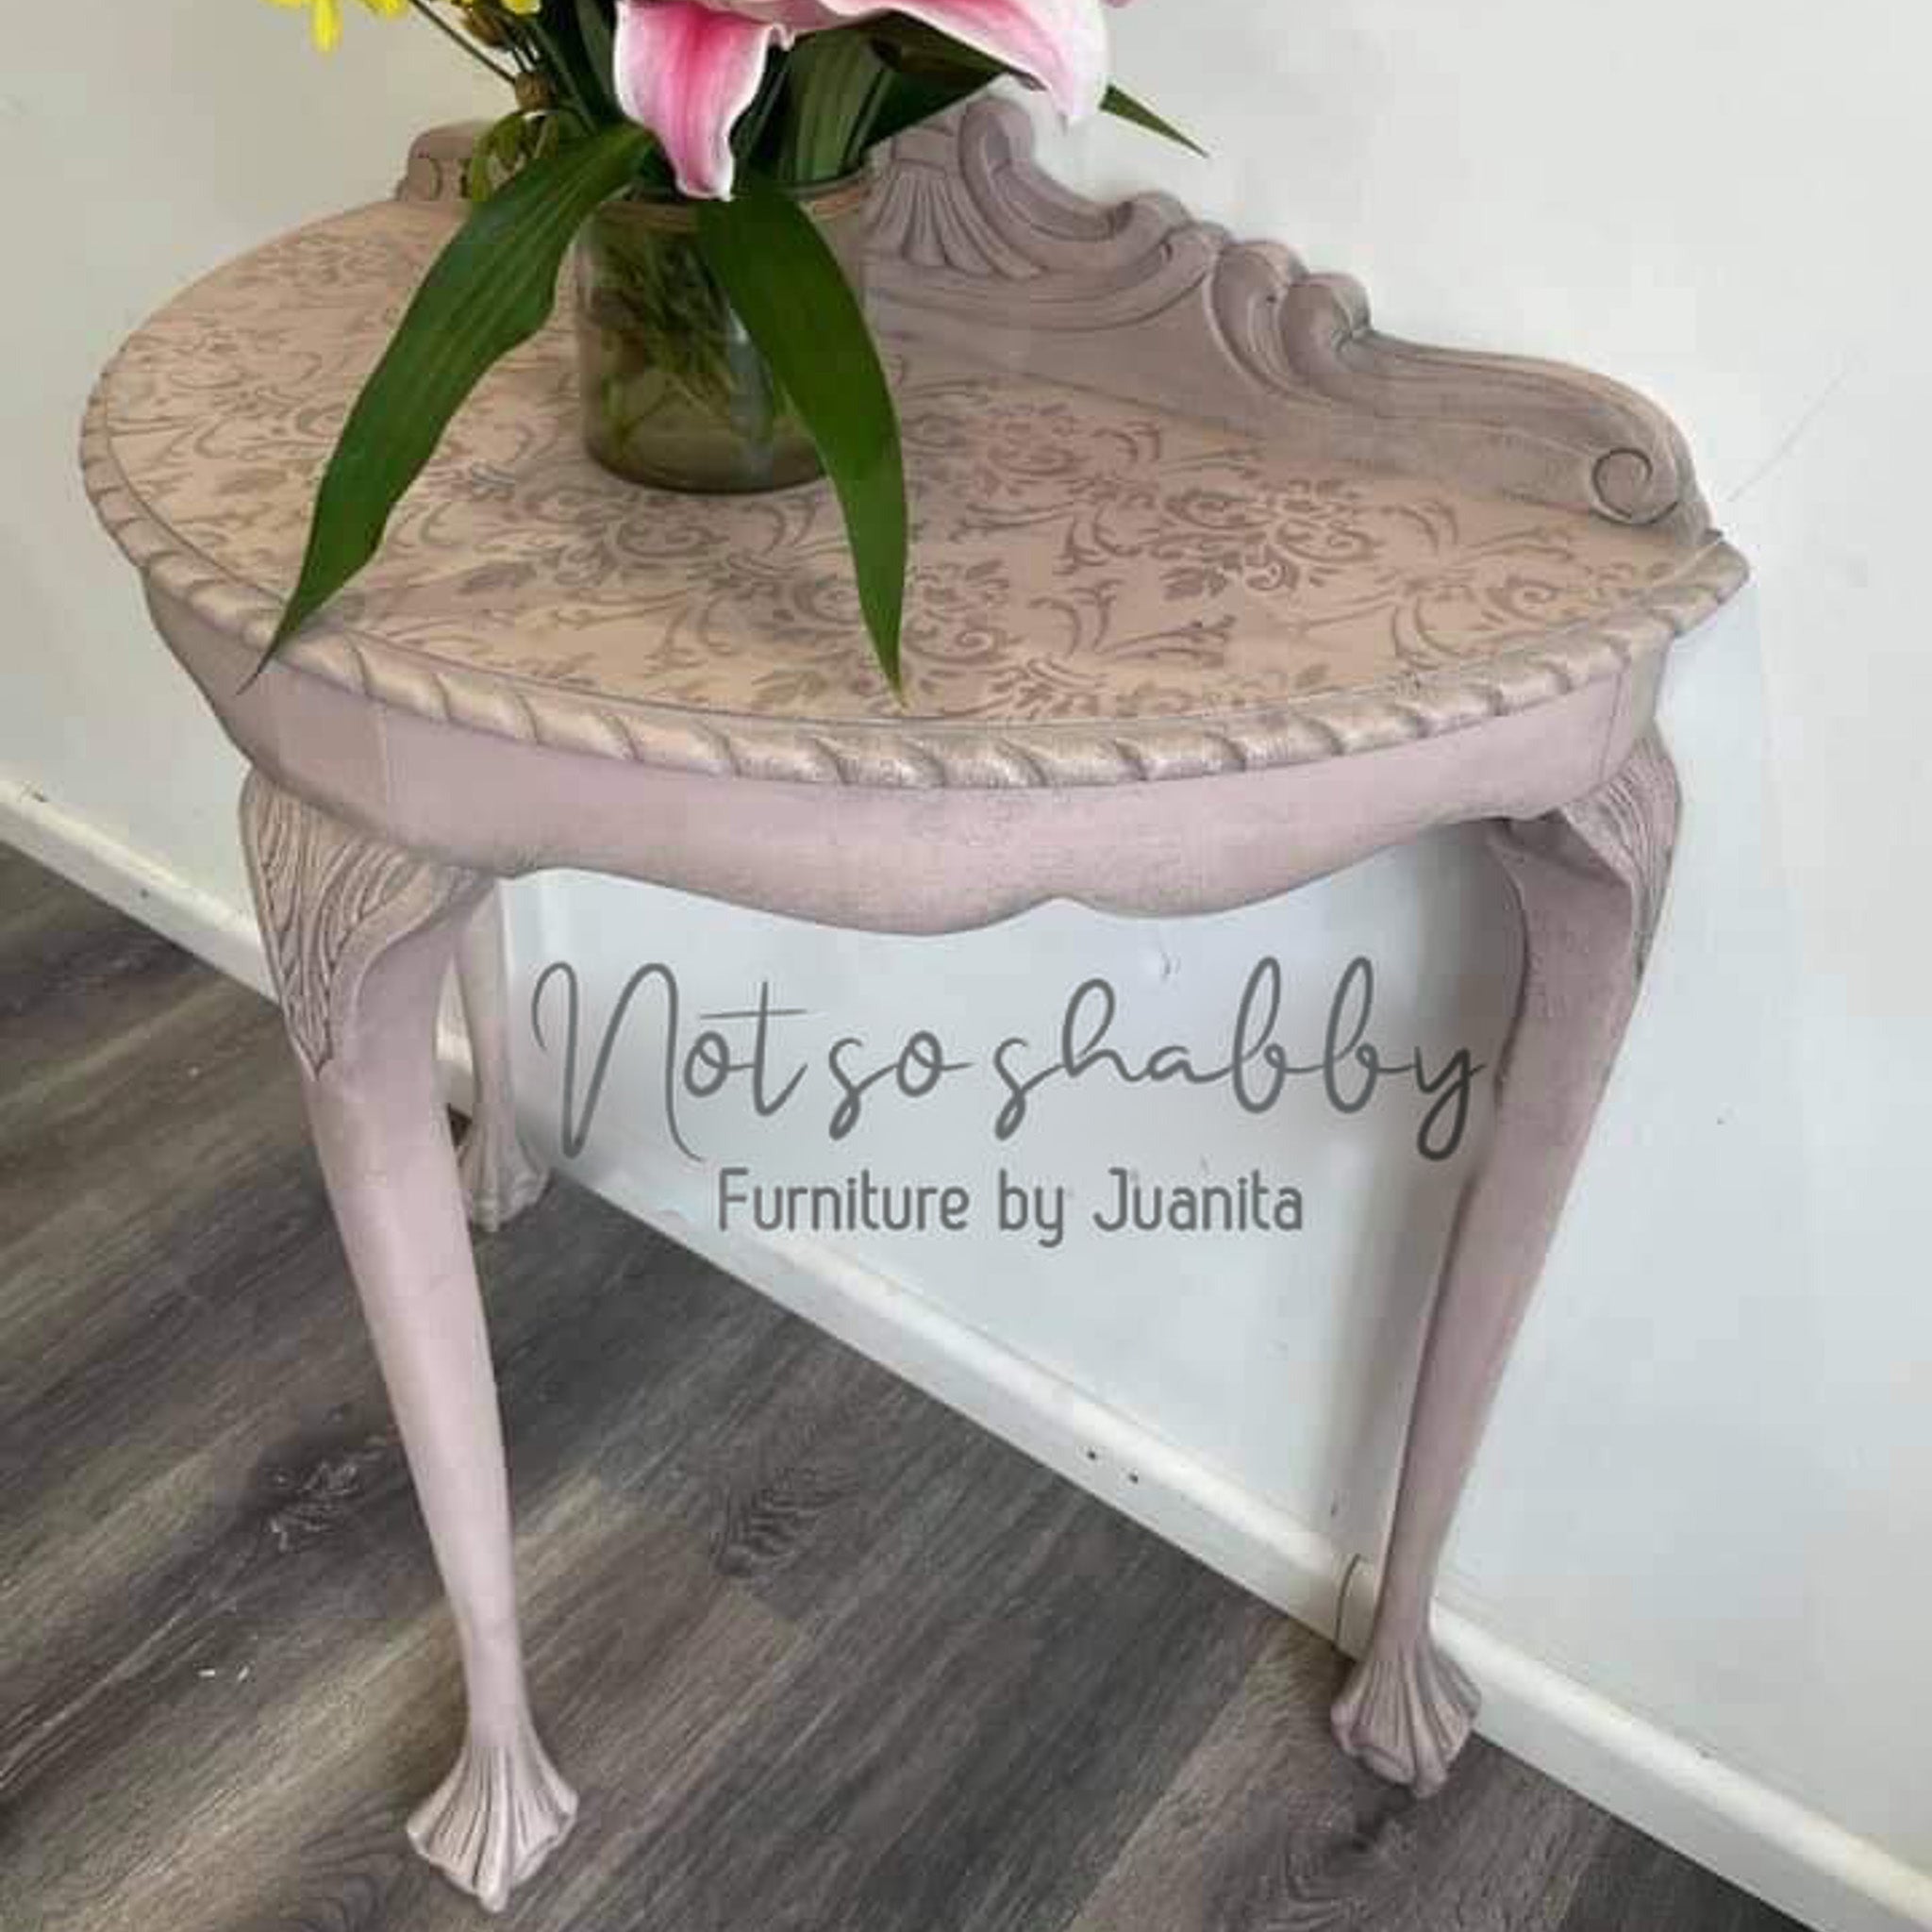 A vintage half-circle side table refurbished by Not so Shabby Furniture by Juanita is painted in Dixie Belle's Soft Pink chalk mineral paint.